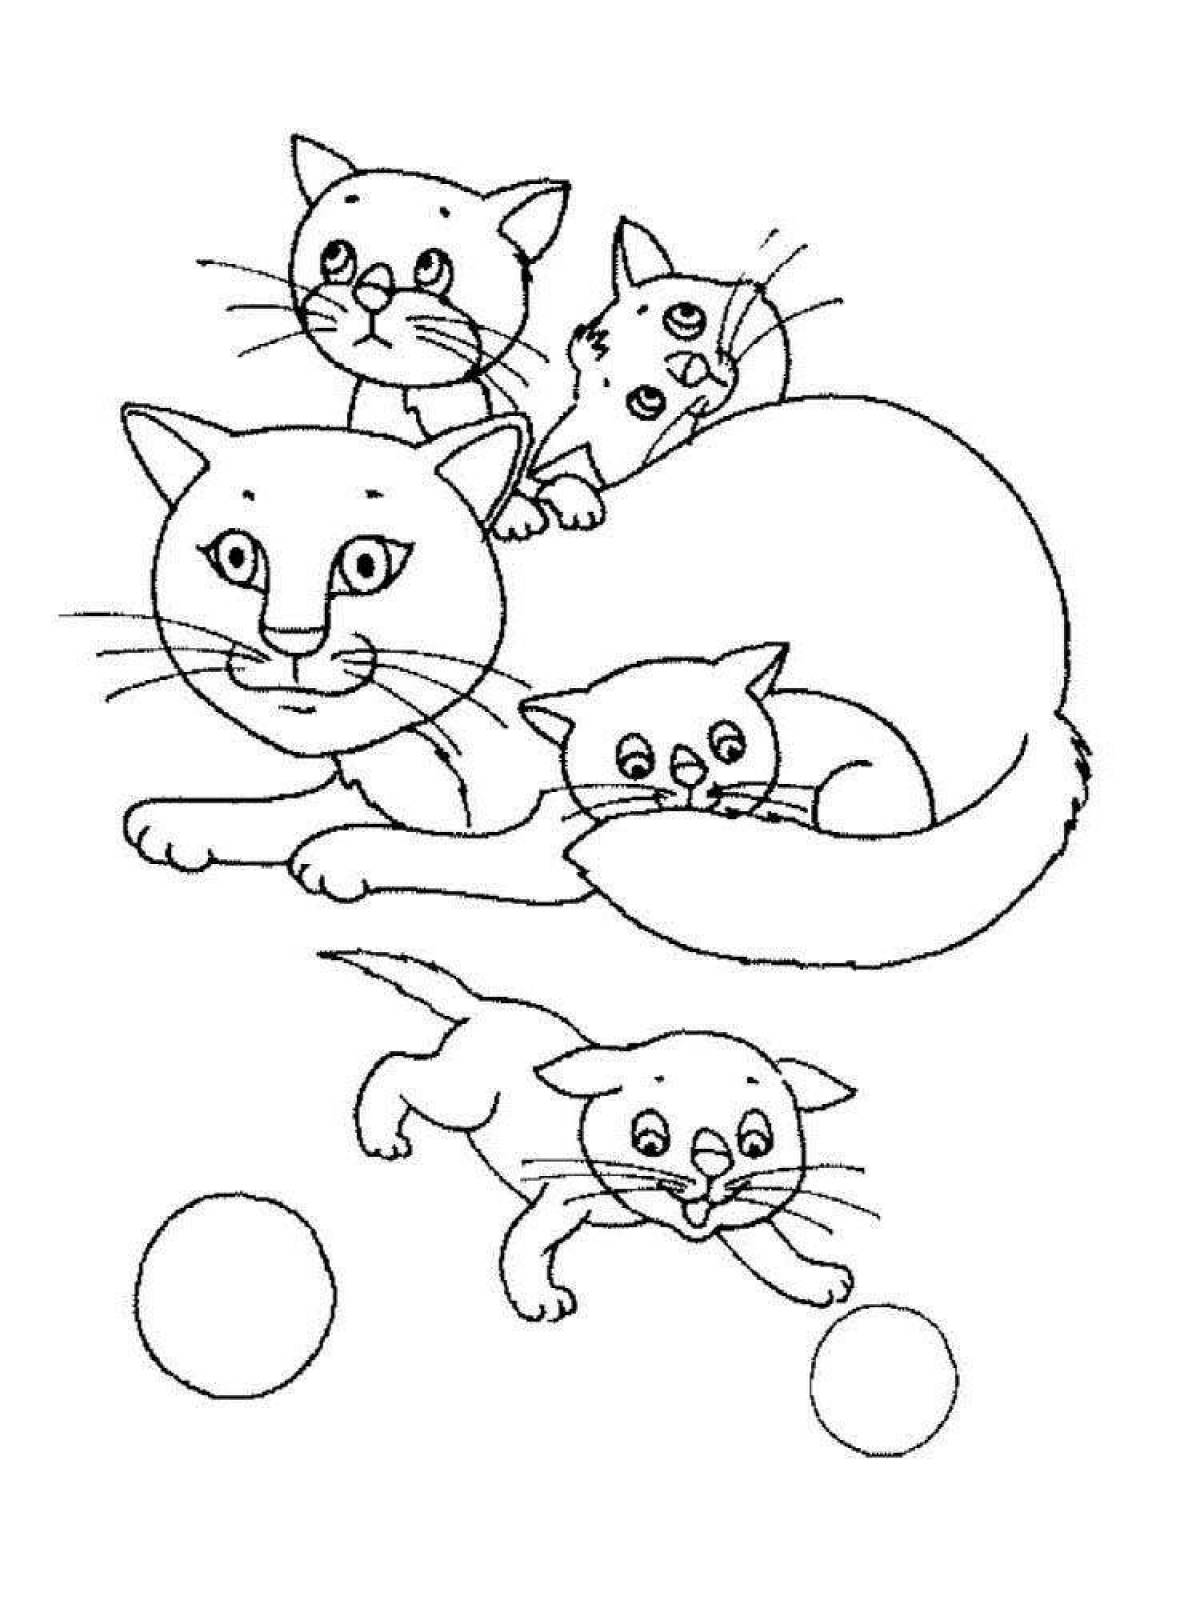 Bright coloring 3 cats